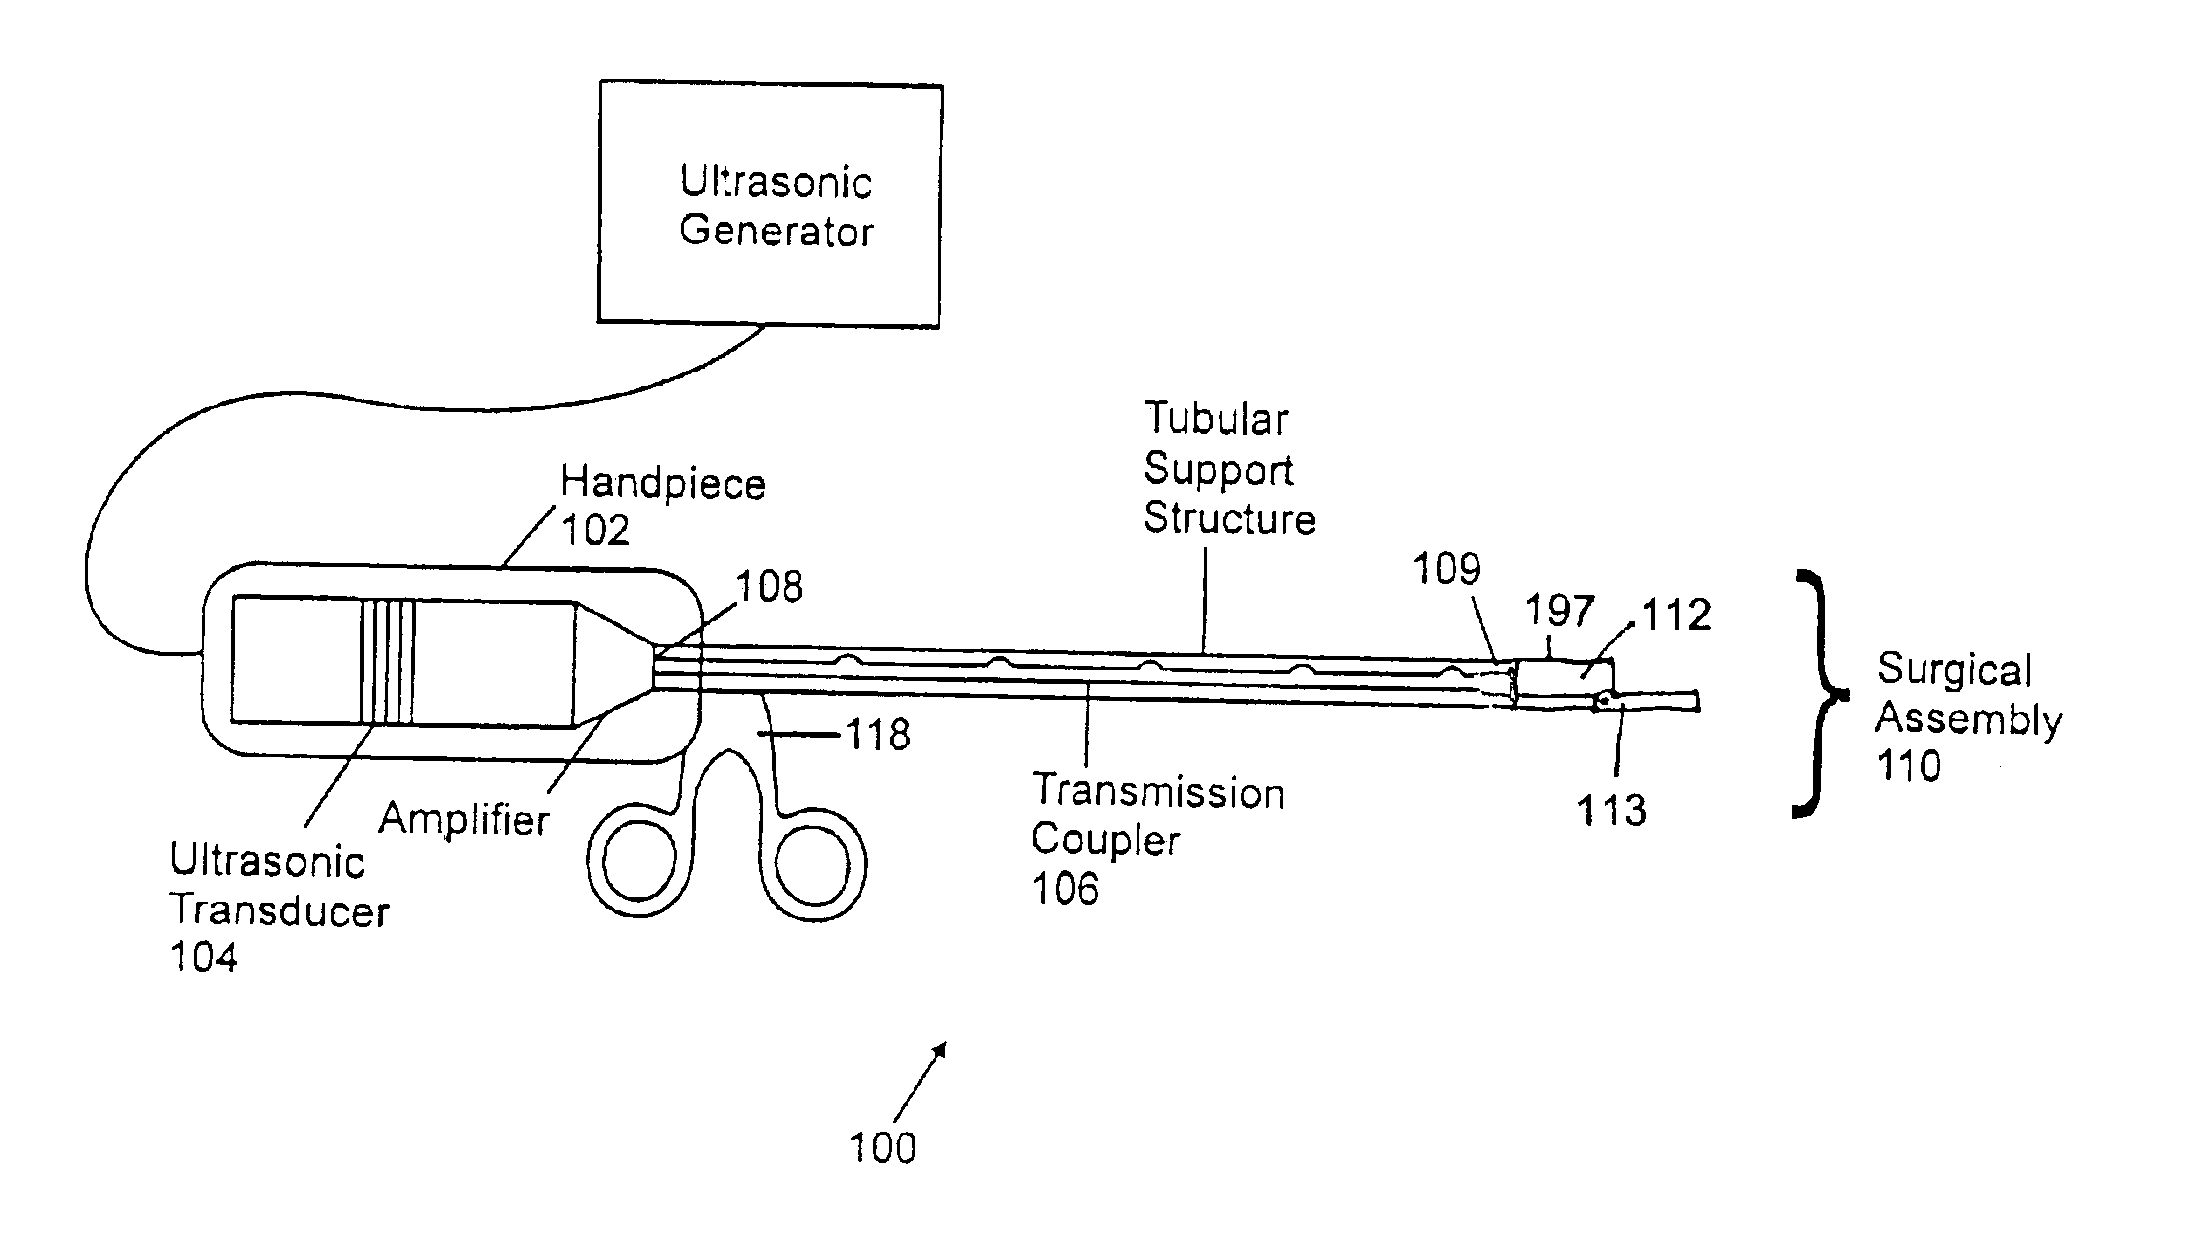 Ultrasonic soft tissue cutting and coagulation systems including a retractable grasper